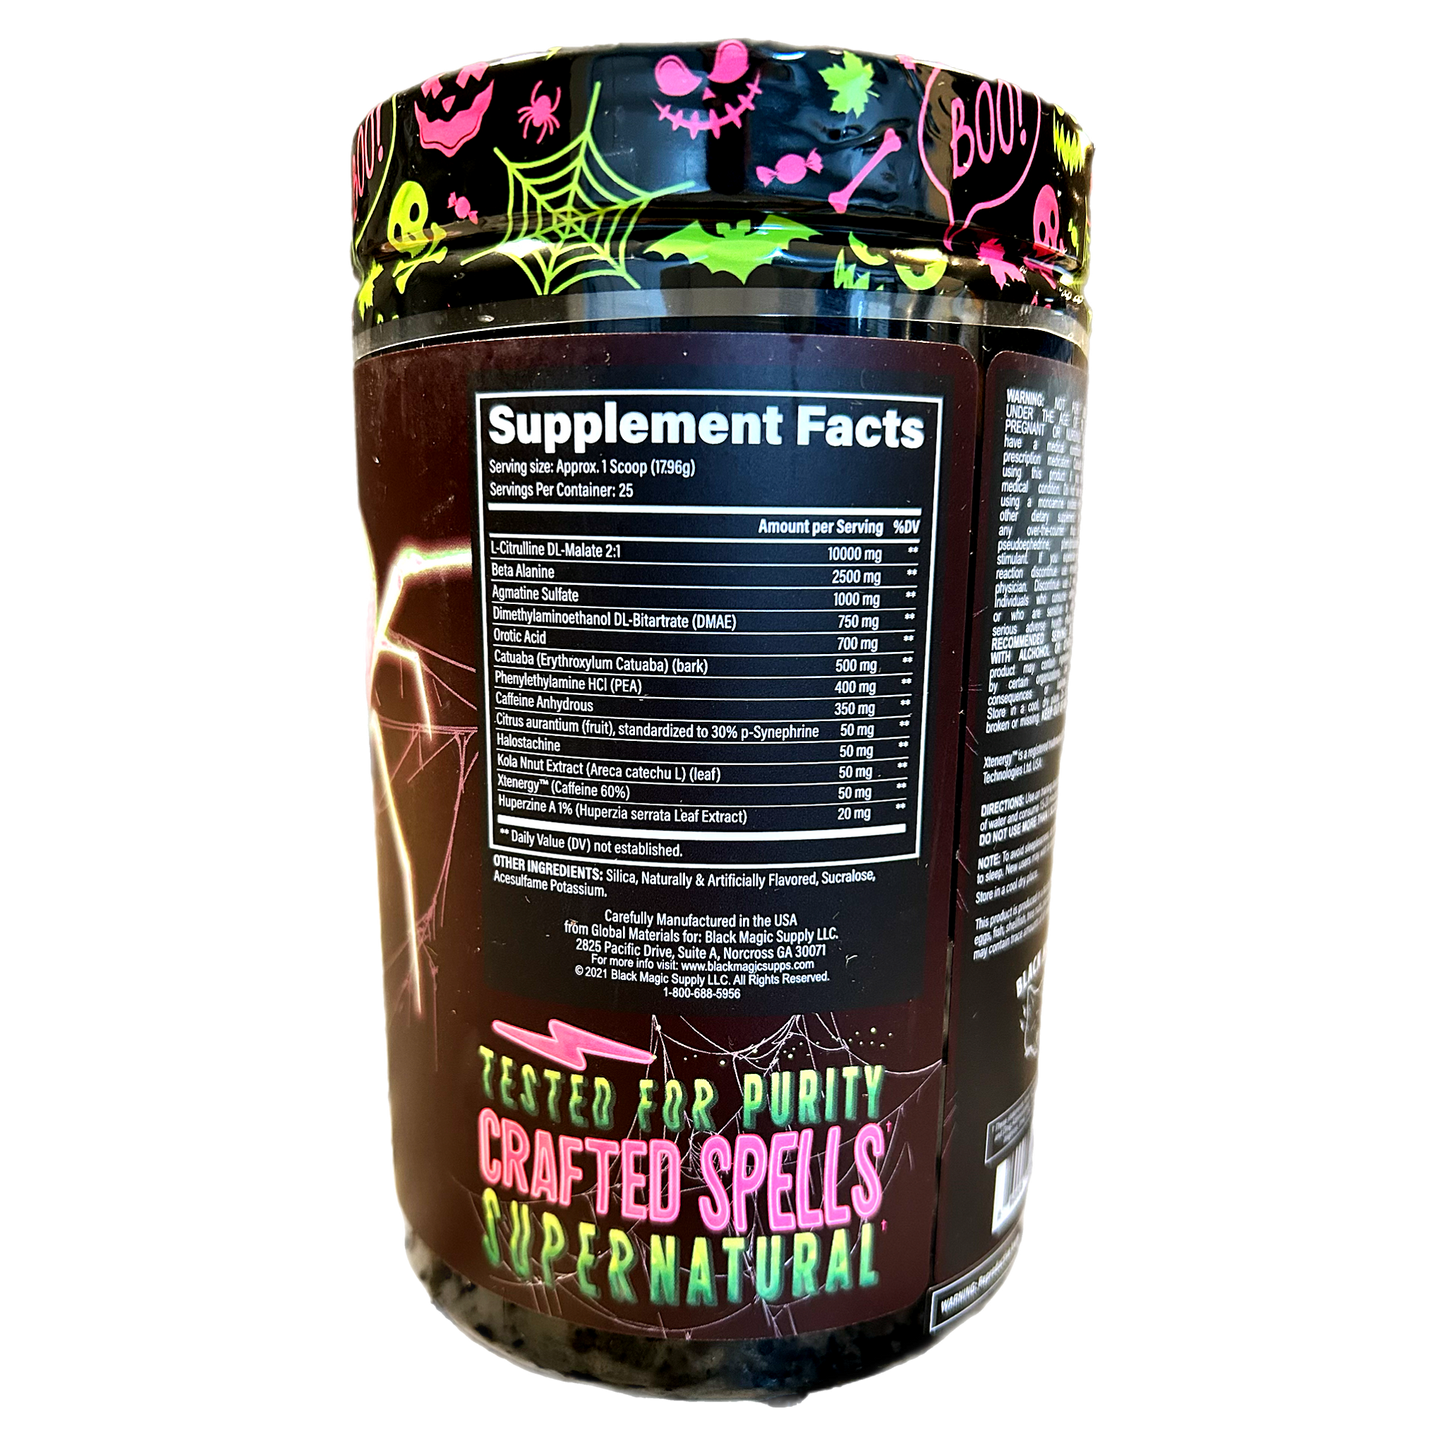 BZRK Voodoo LIMITED EDITION Pre-Workout